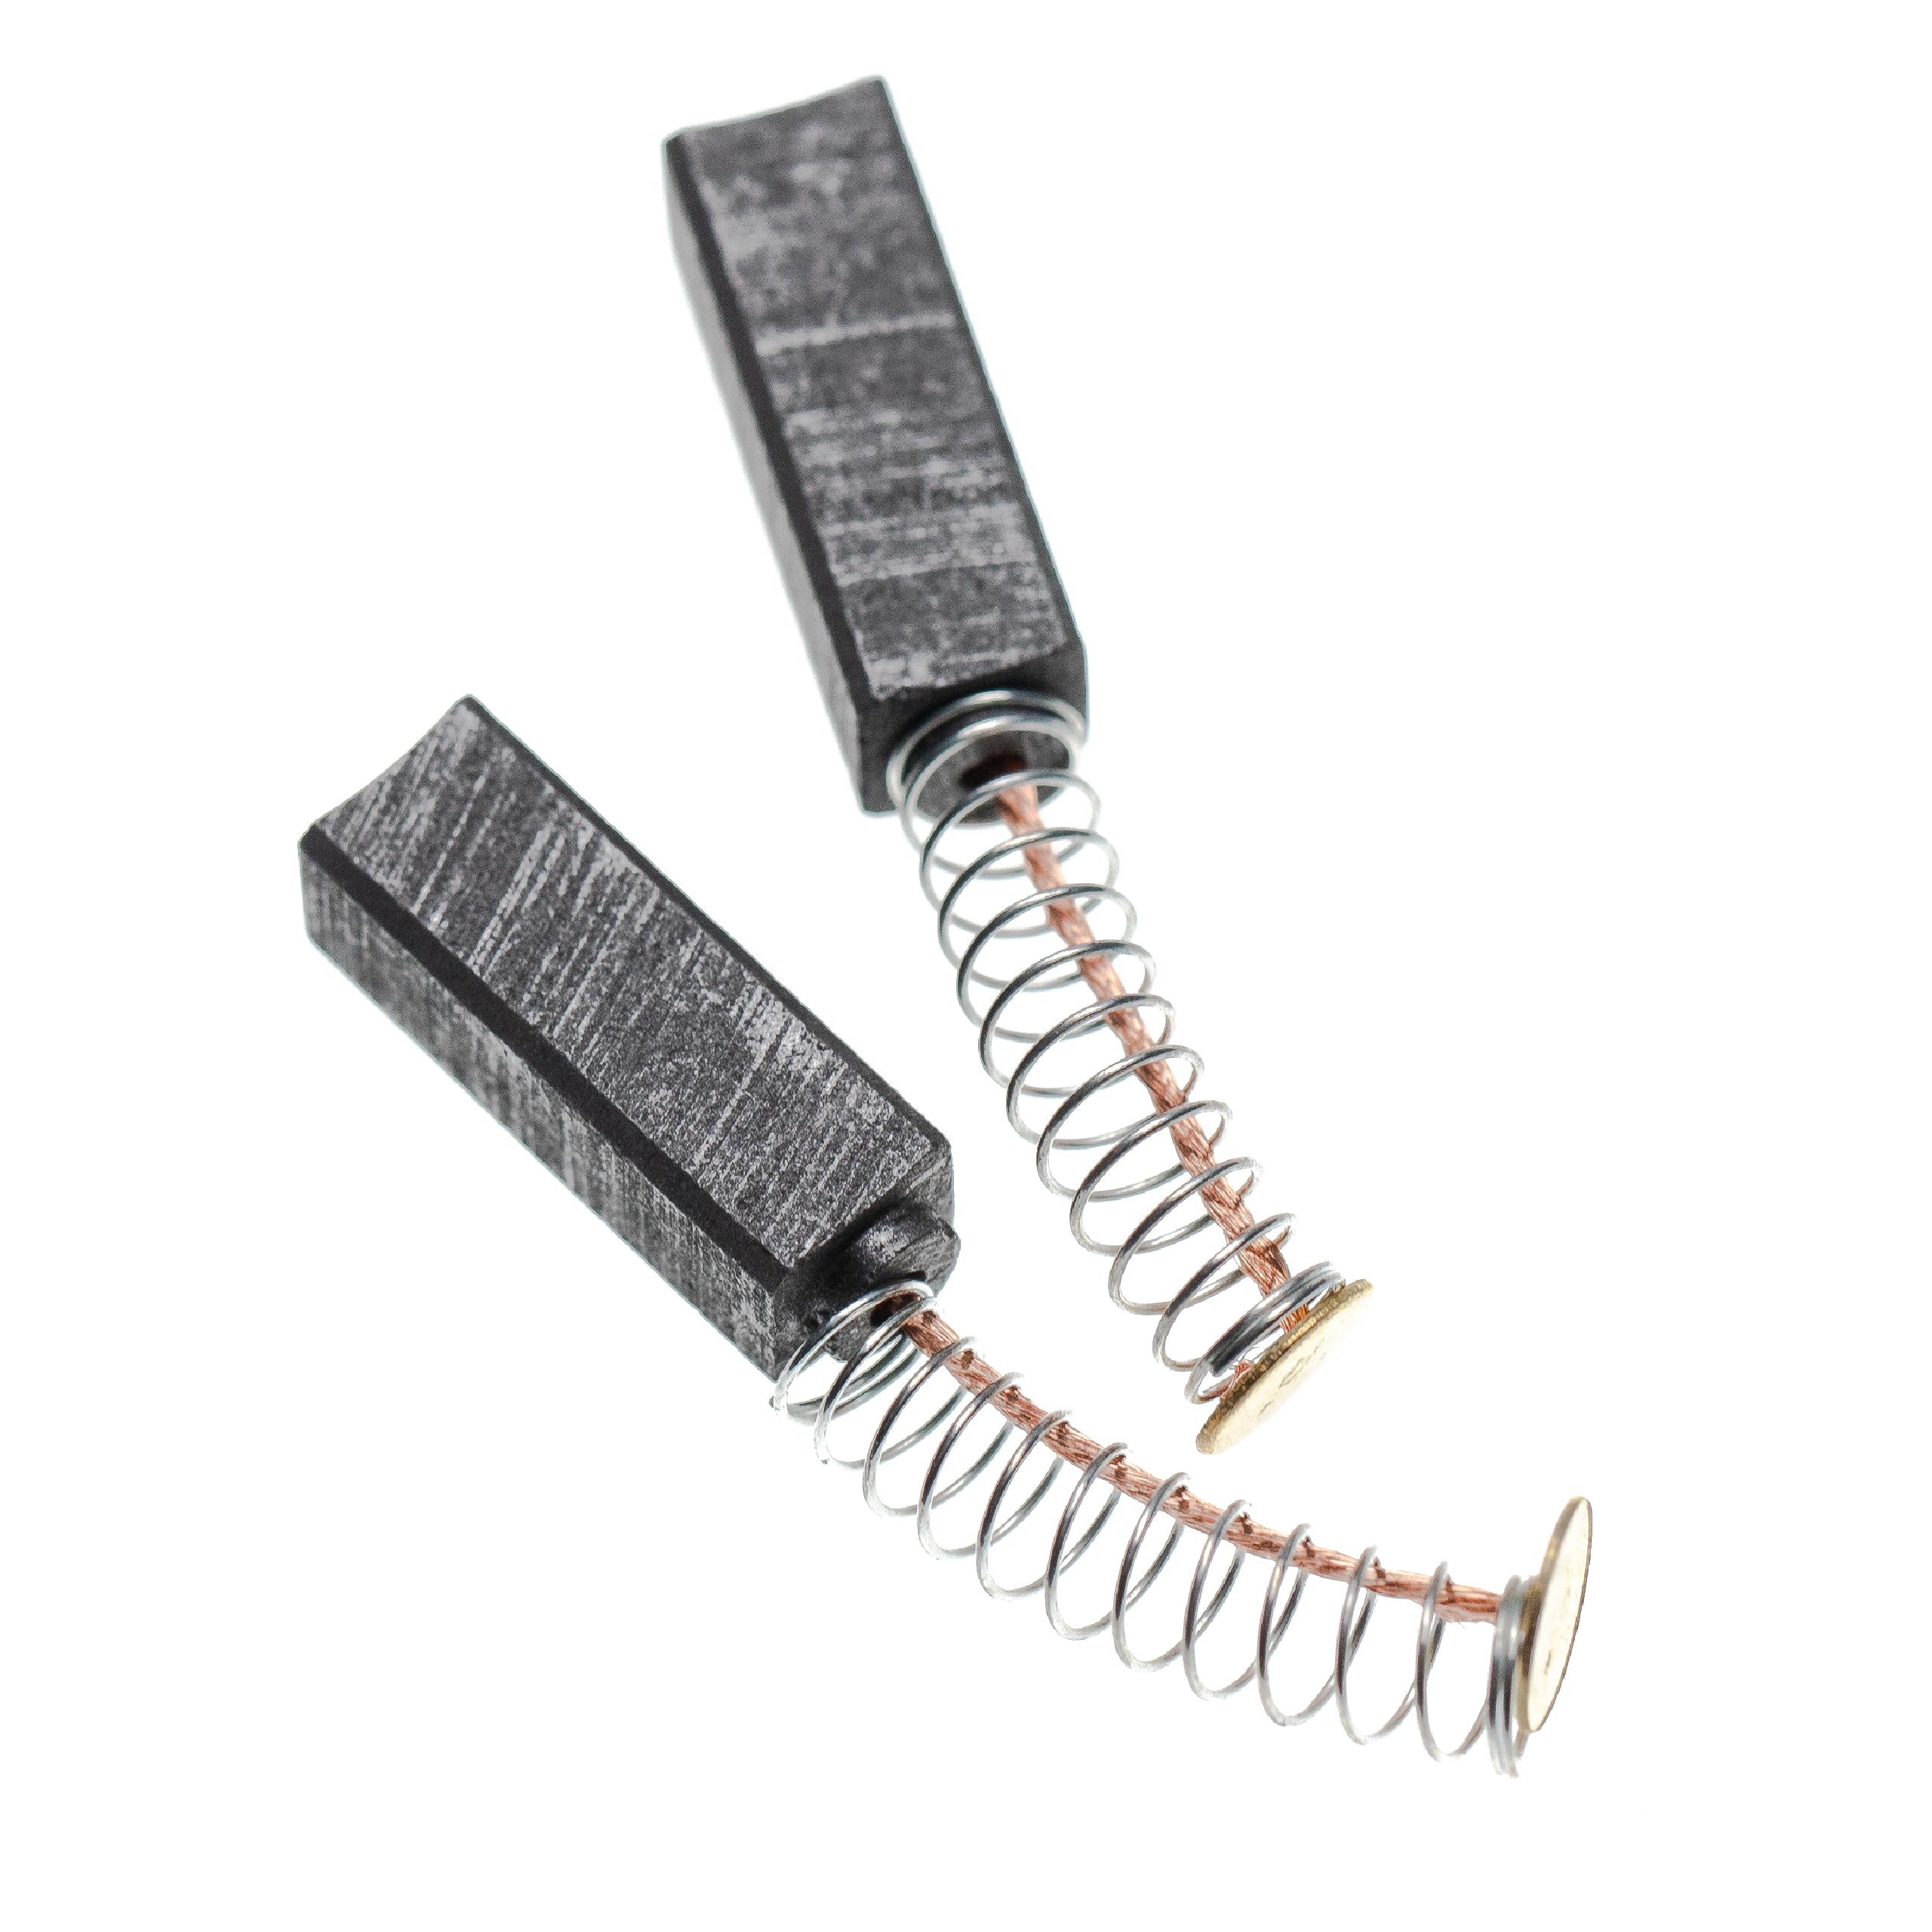 2x Carbon Brush as Replacement for Metabo 316033380 Electric Power Tools + Spring, 17.8 x 63 x 63mm